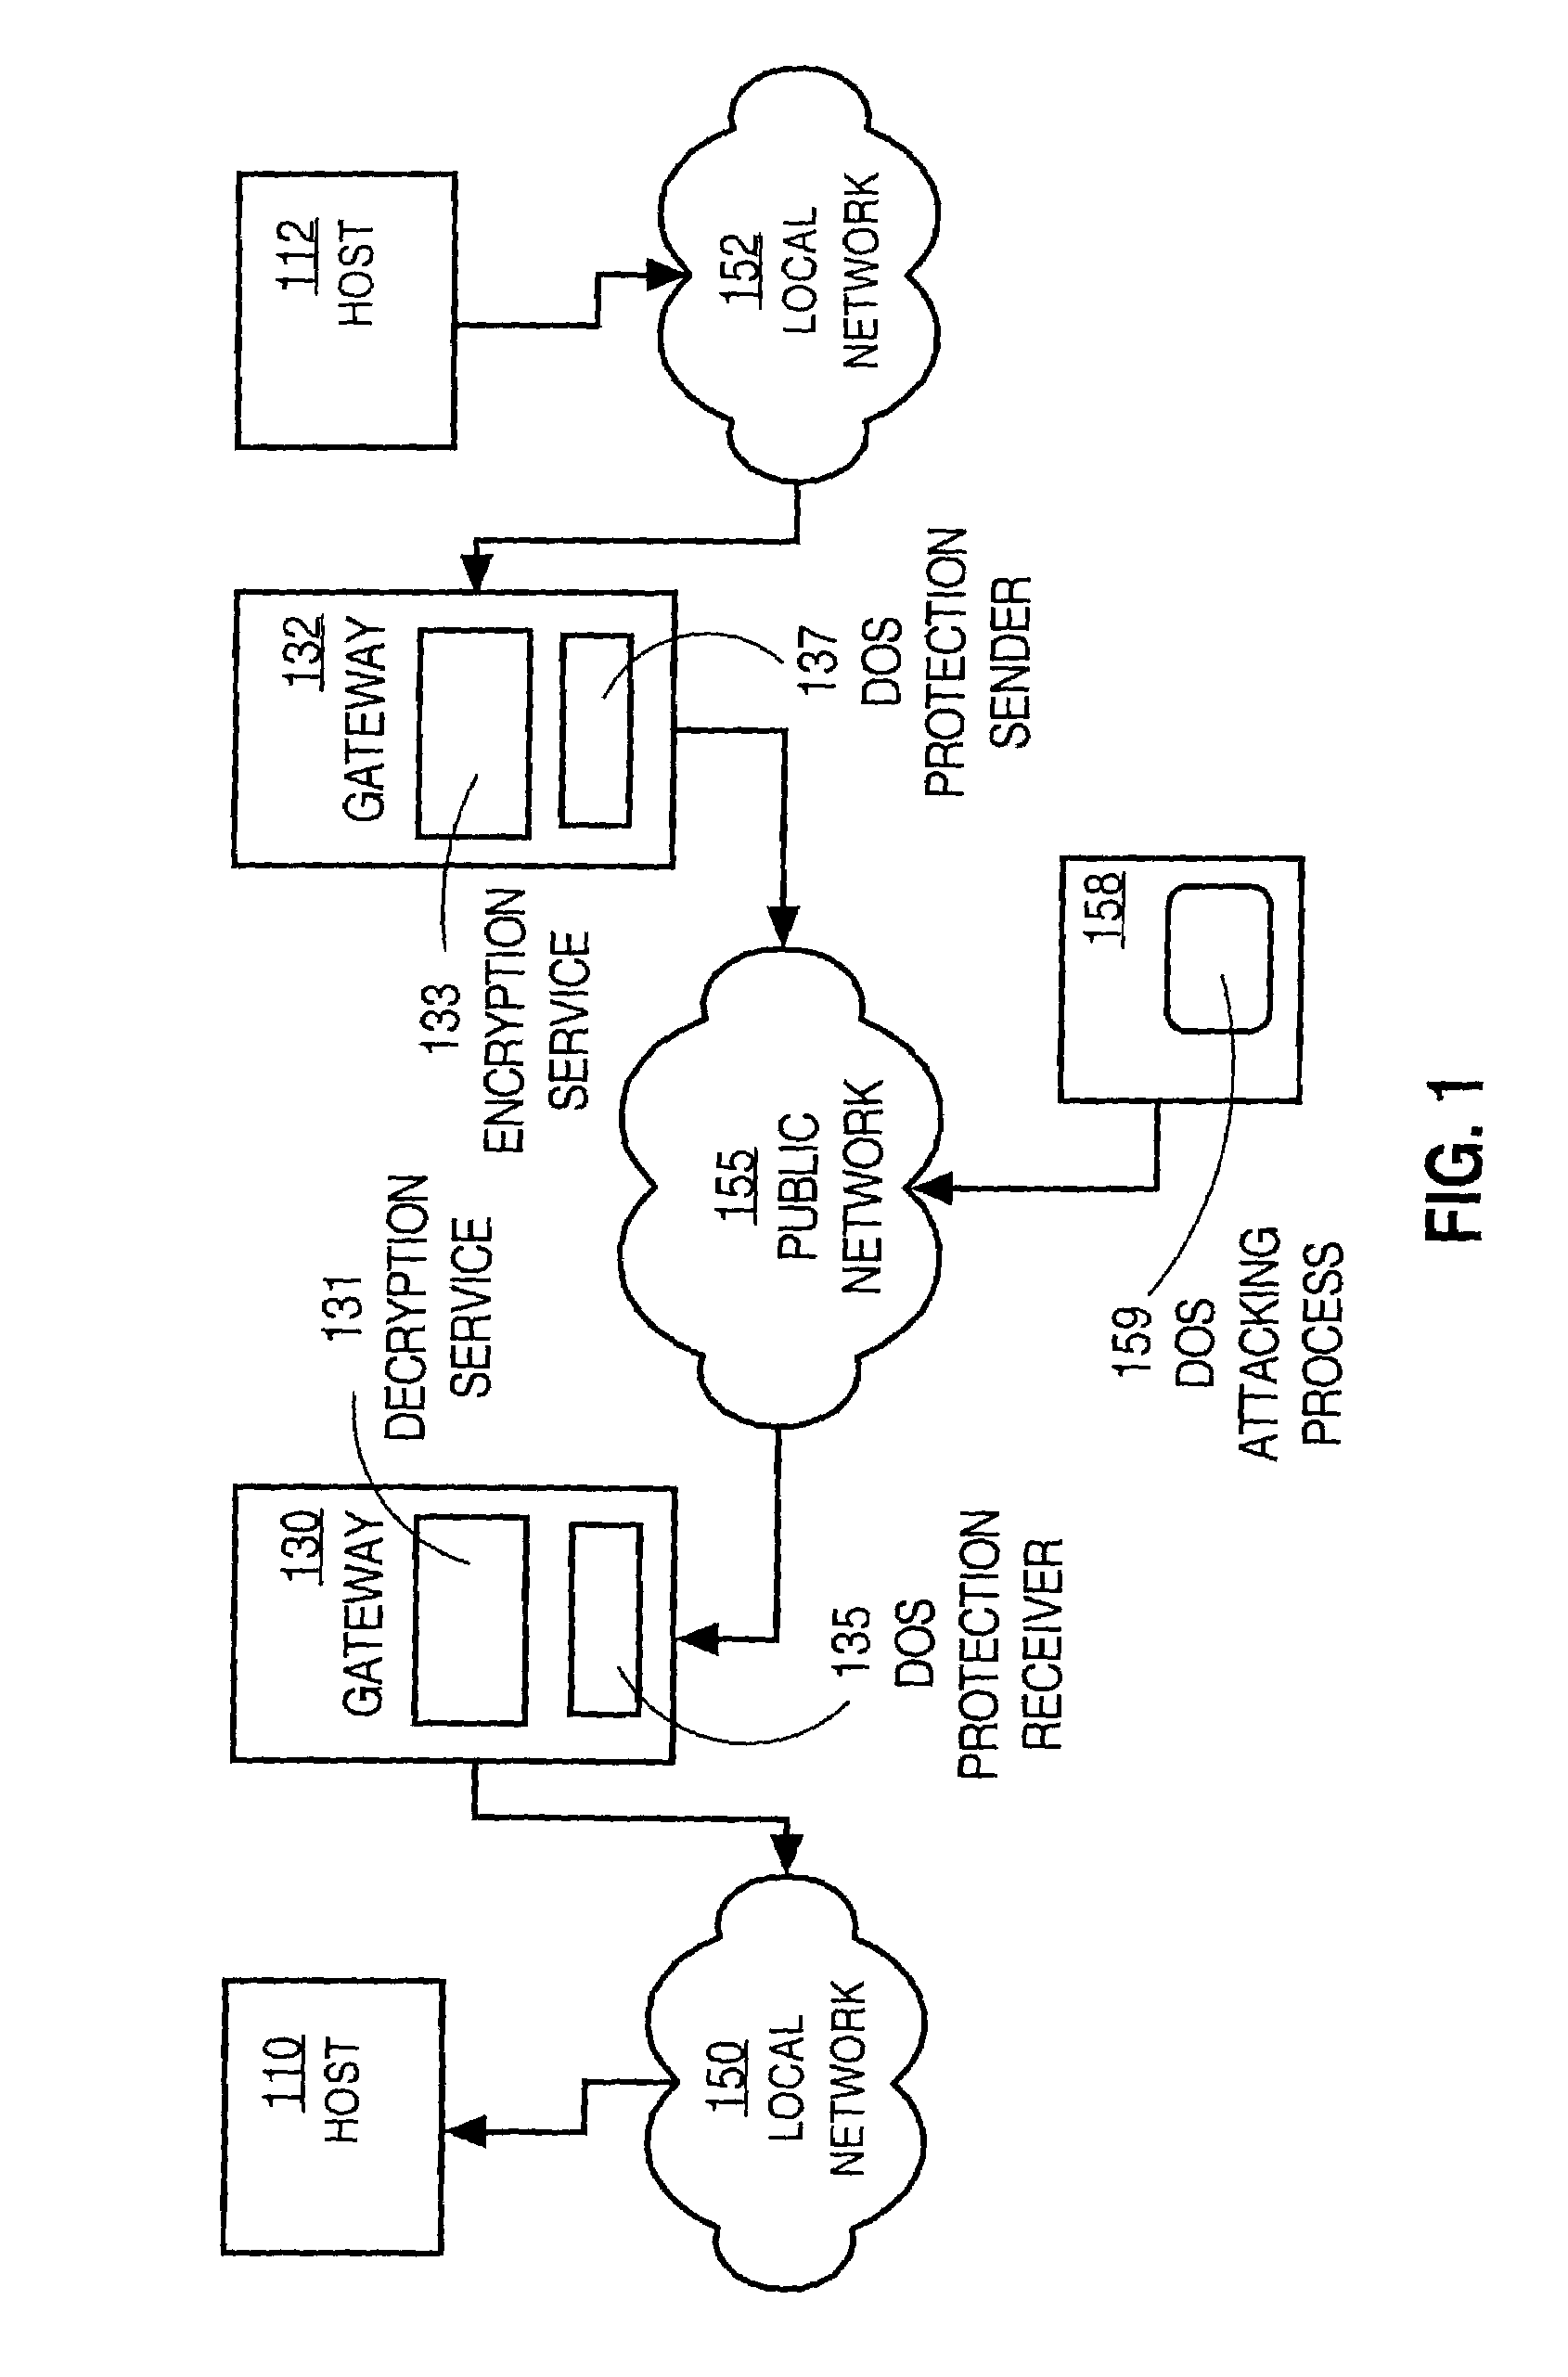 Method and apparatus for cryptographically blocking network denial of service attacks based on payload size